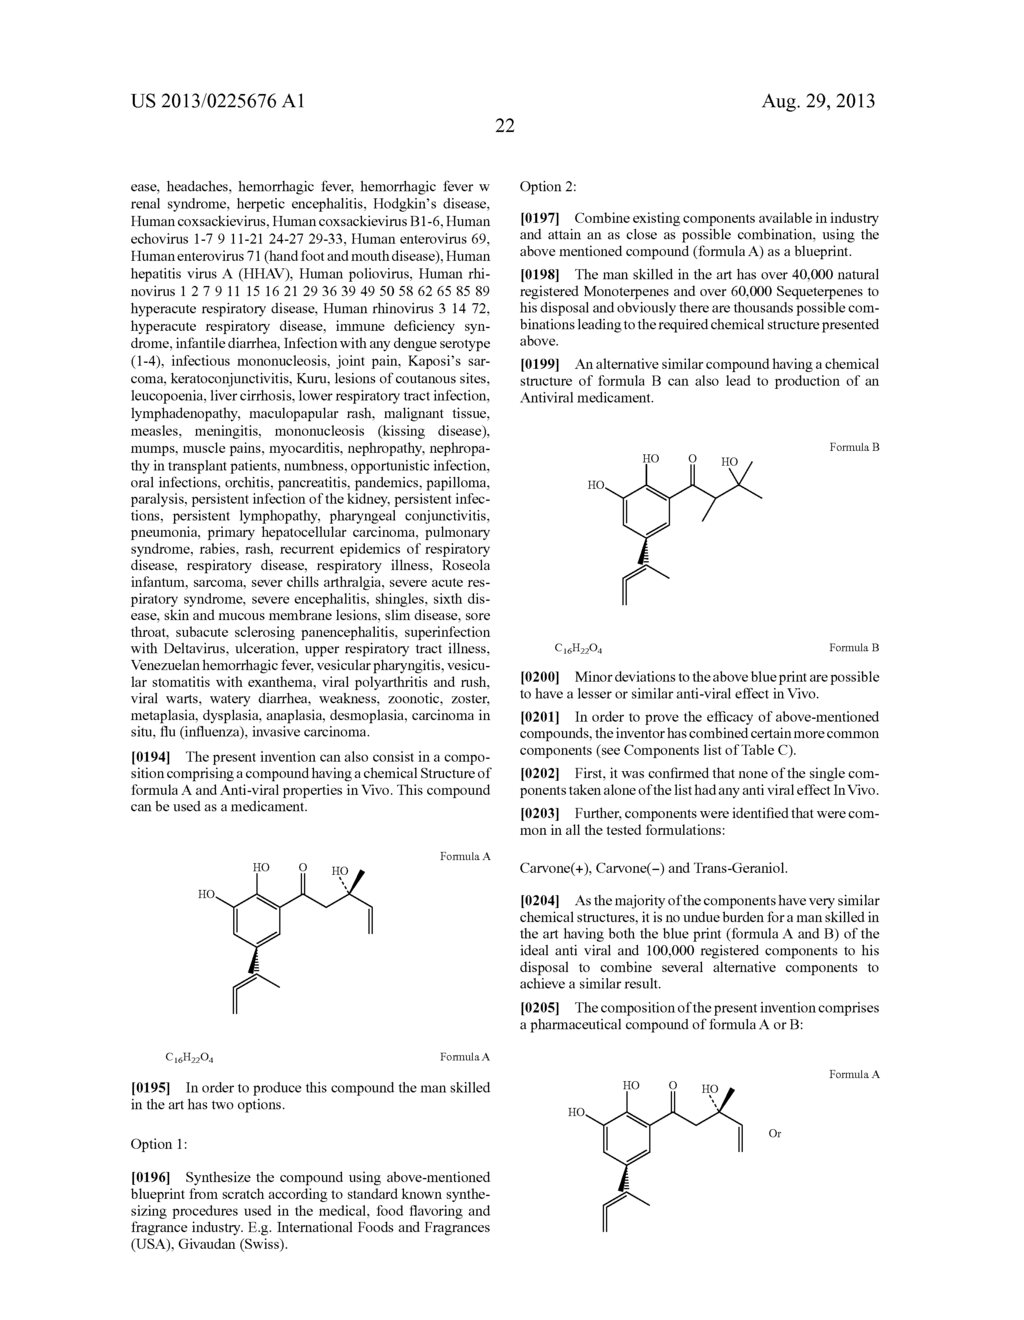 VIRAL INHIBITOR COMPOSITIONS FOR IN VIVO THERAPEUTIC USE COMPRISING A     COMBINATION OF (-) -CARVONE, GERANIOL AND A FURTHER ESSENTIAL OIL     COMPONENT - diagram, schematic, and image 23